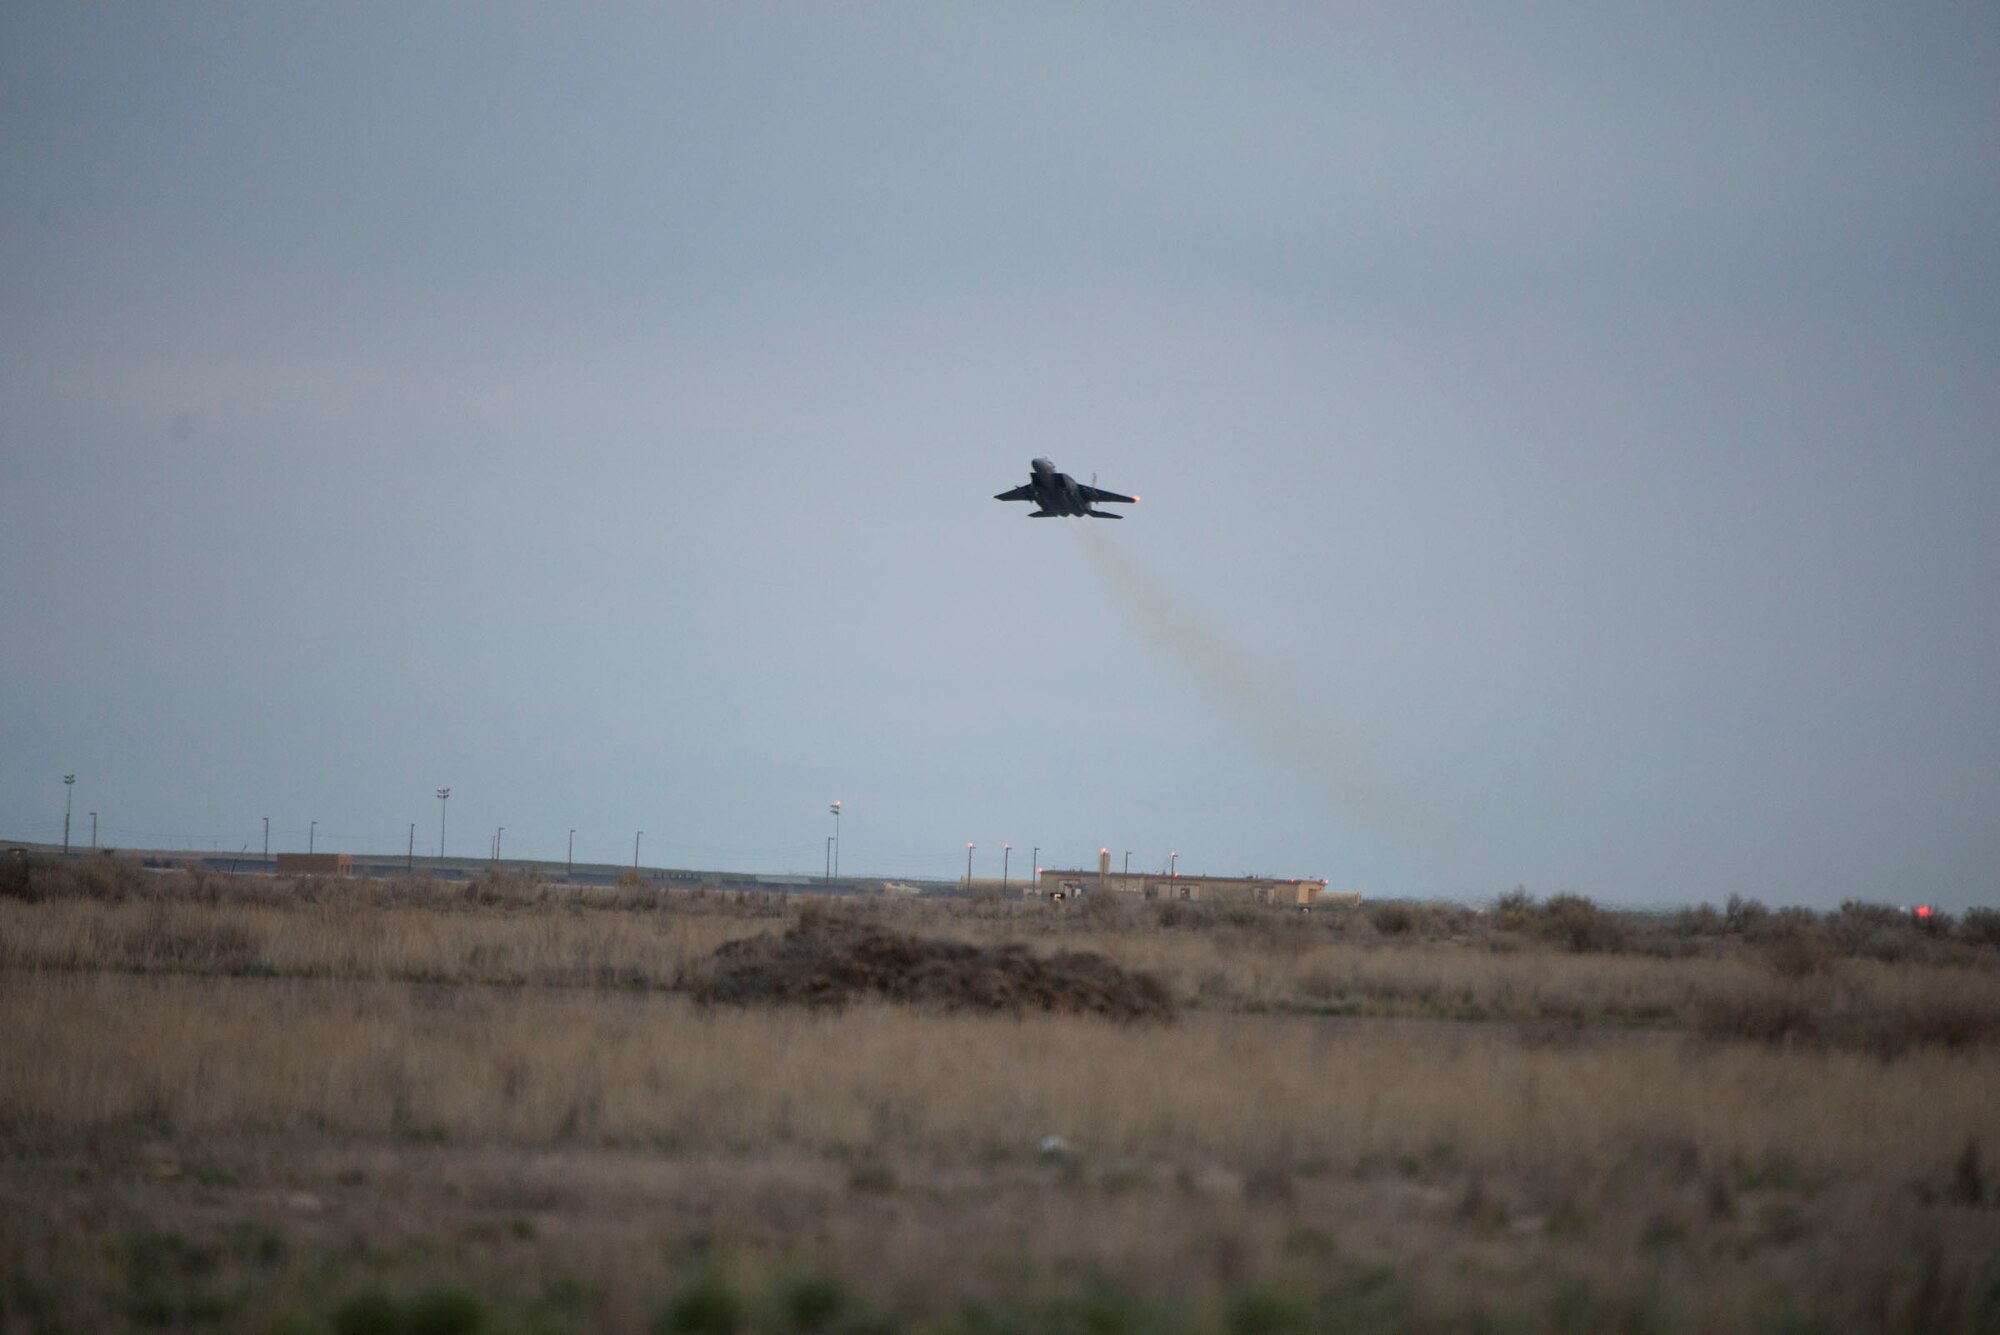 An F-15E Strike Eagle takes off from Mountain Home Air Force Base, Idaho, March 16, 2016. The 366th Fighter Wing conducted a sortie suge which prepared Gunfighters for the stress of 24-hour operations. (U.S. Air Force photo by Airman 1st Class Chester Mientkiewicz/Released)